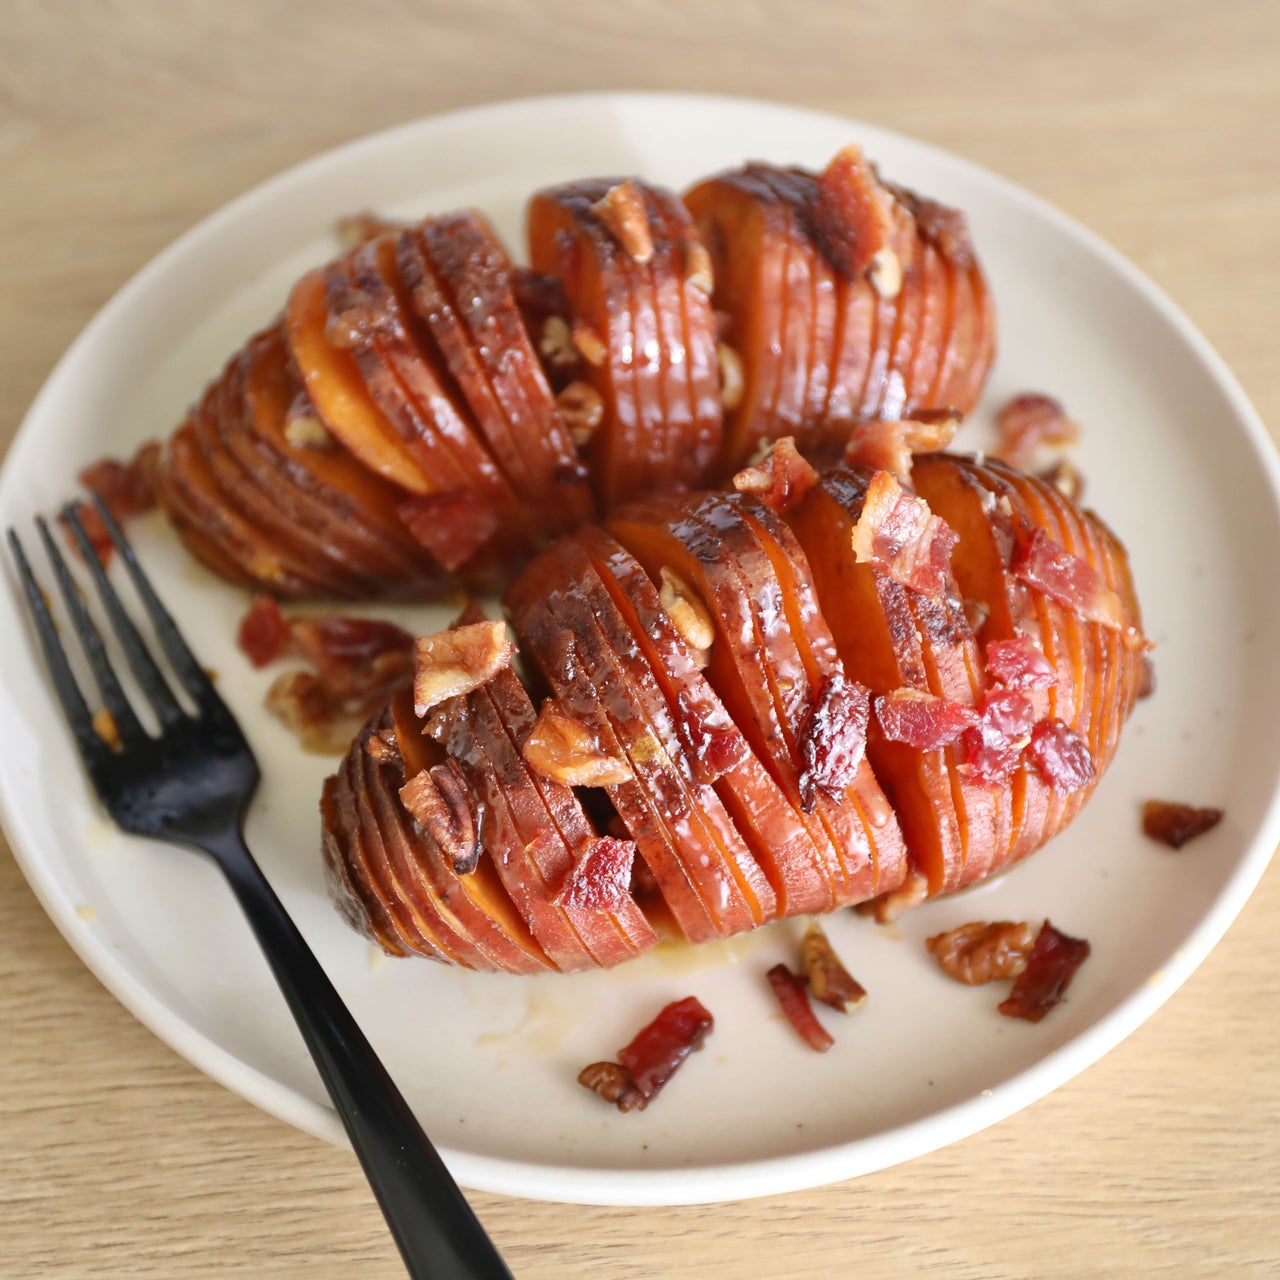 Hasselback Sweet Potatoes with Candied Bacon